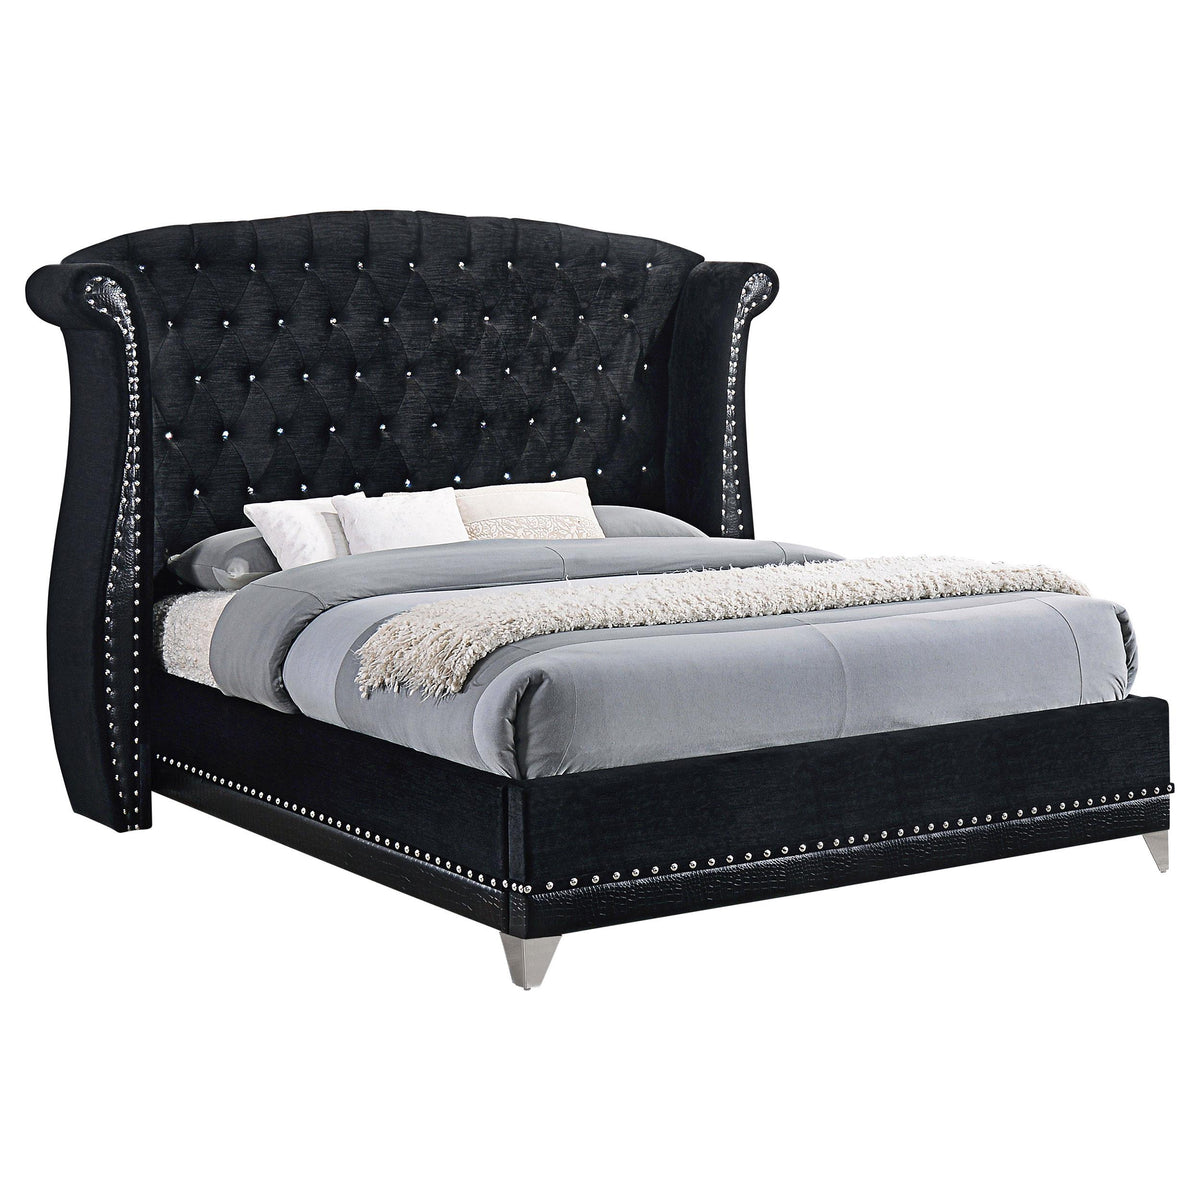 Barzini Queen Tufted Upholstered Bed Black  Half Price Furniture